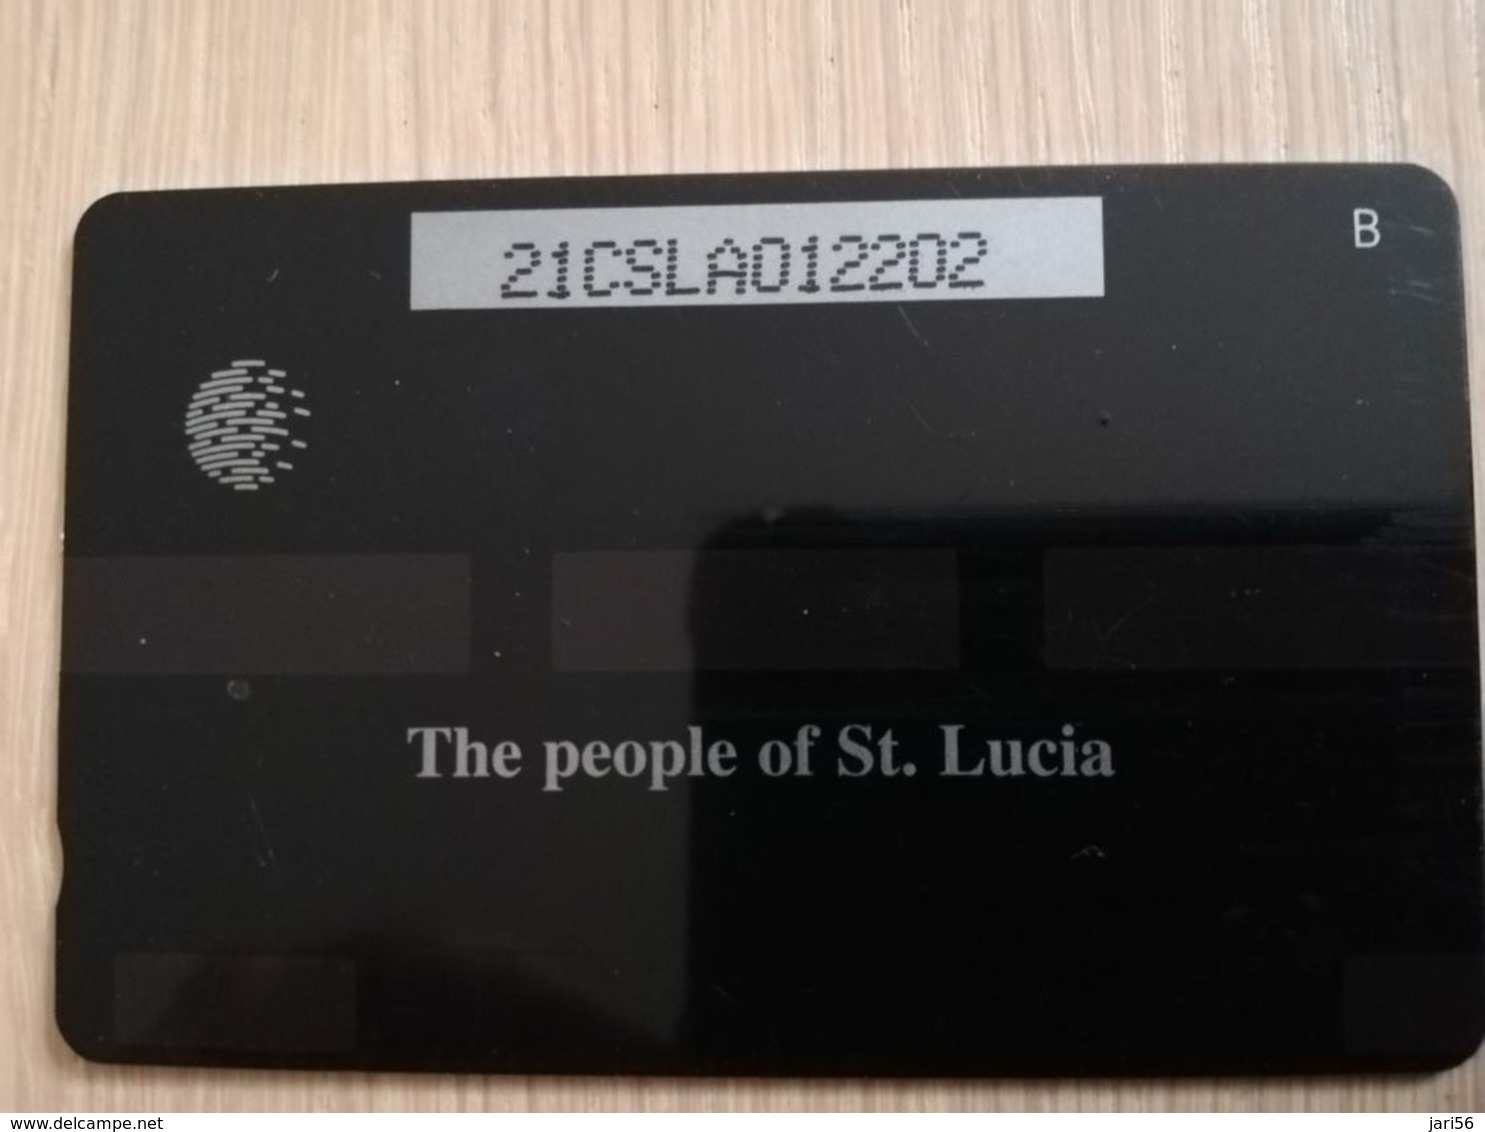 ST LUCIA    $ 10   CABLE & WIRELESS  STL-21A  21CSLA       Fine Used Card ** 2421** - St. Lucia